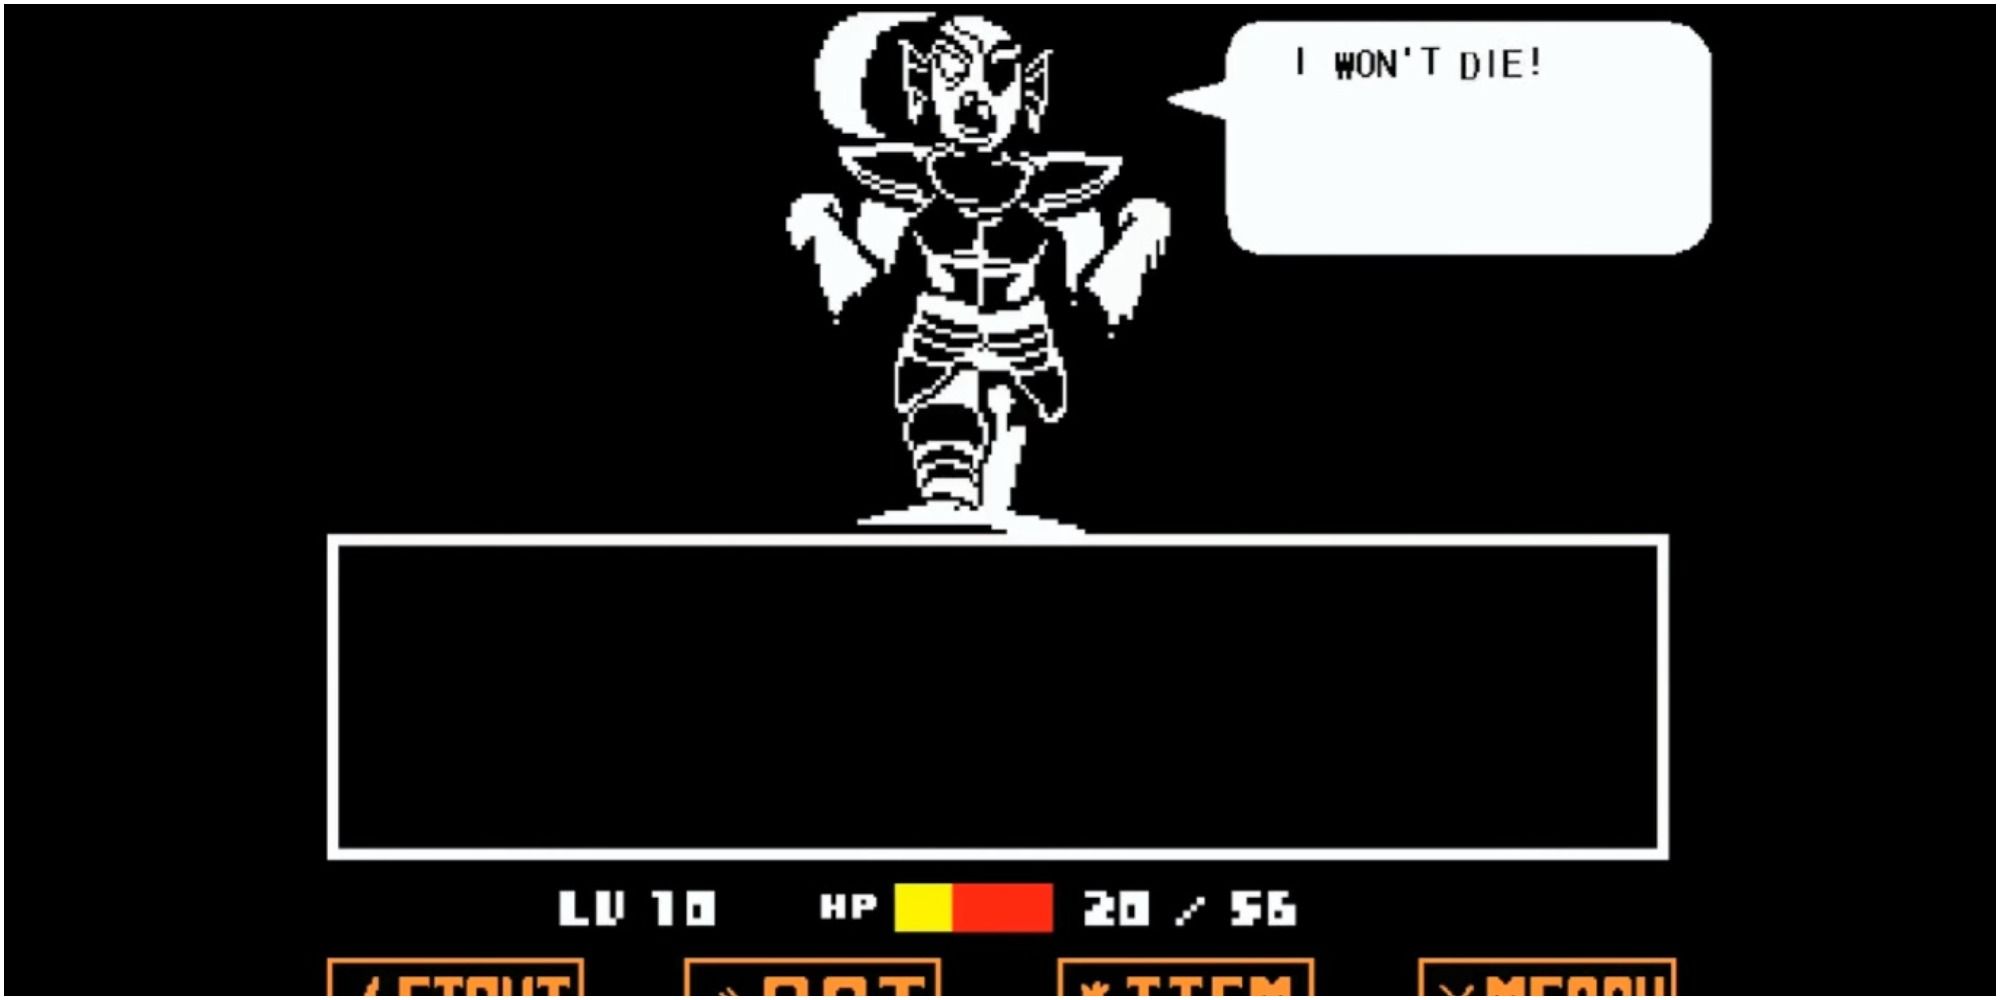 Undyne fading away after being defeated and trying to not die.